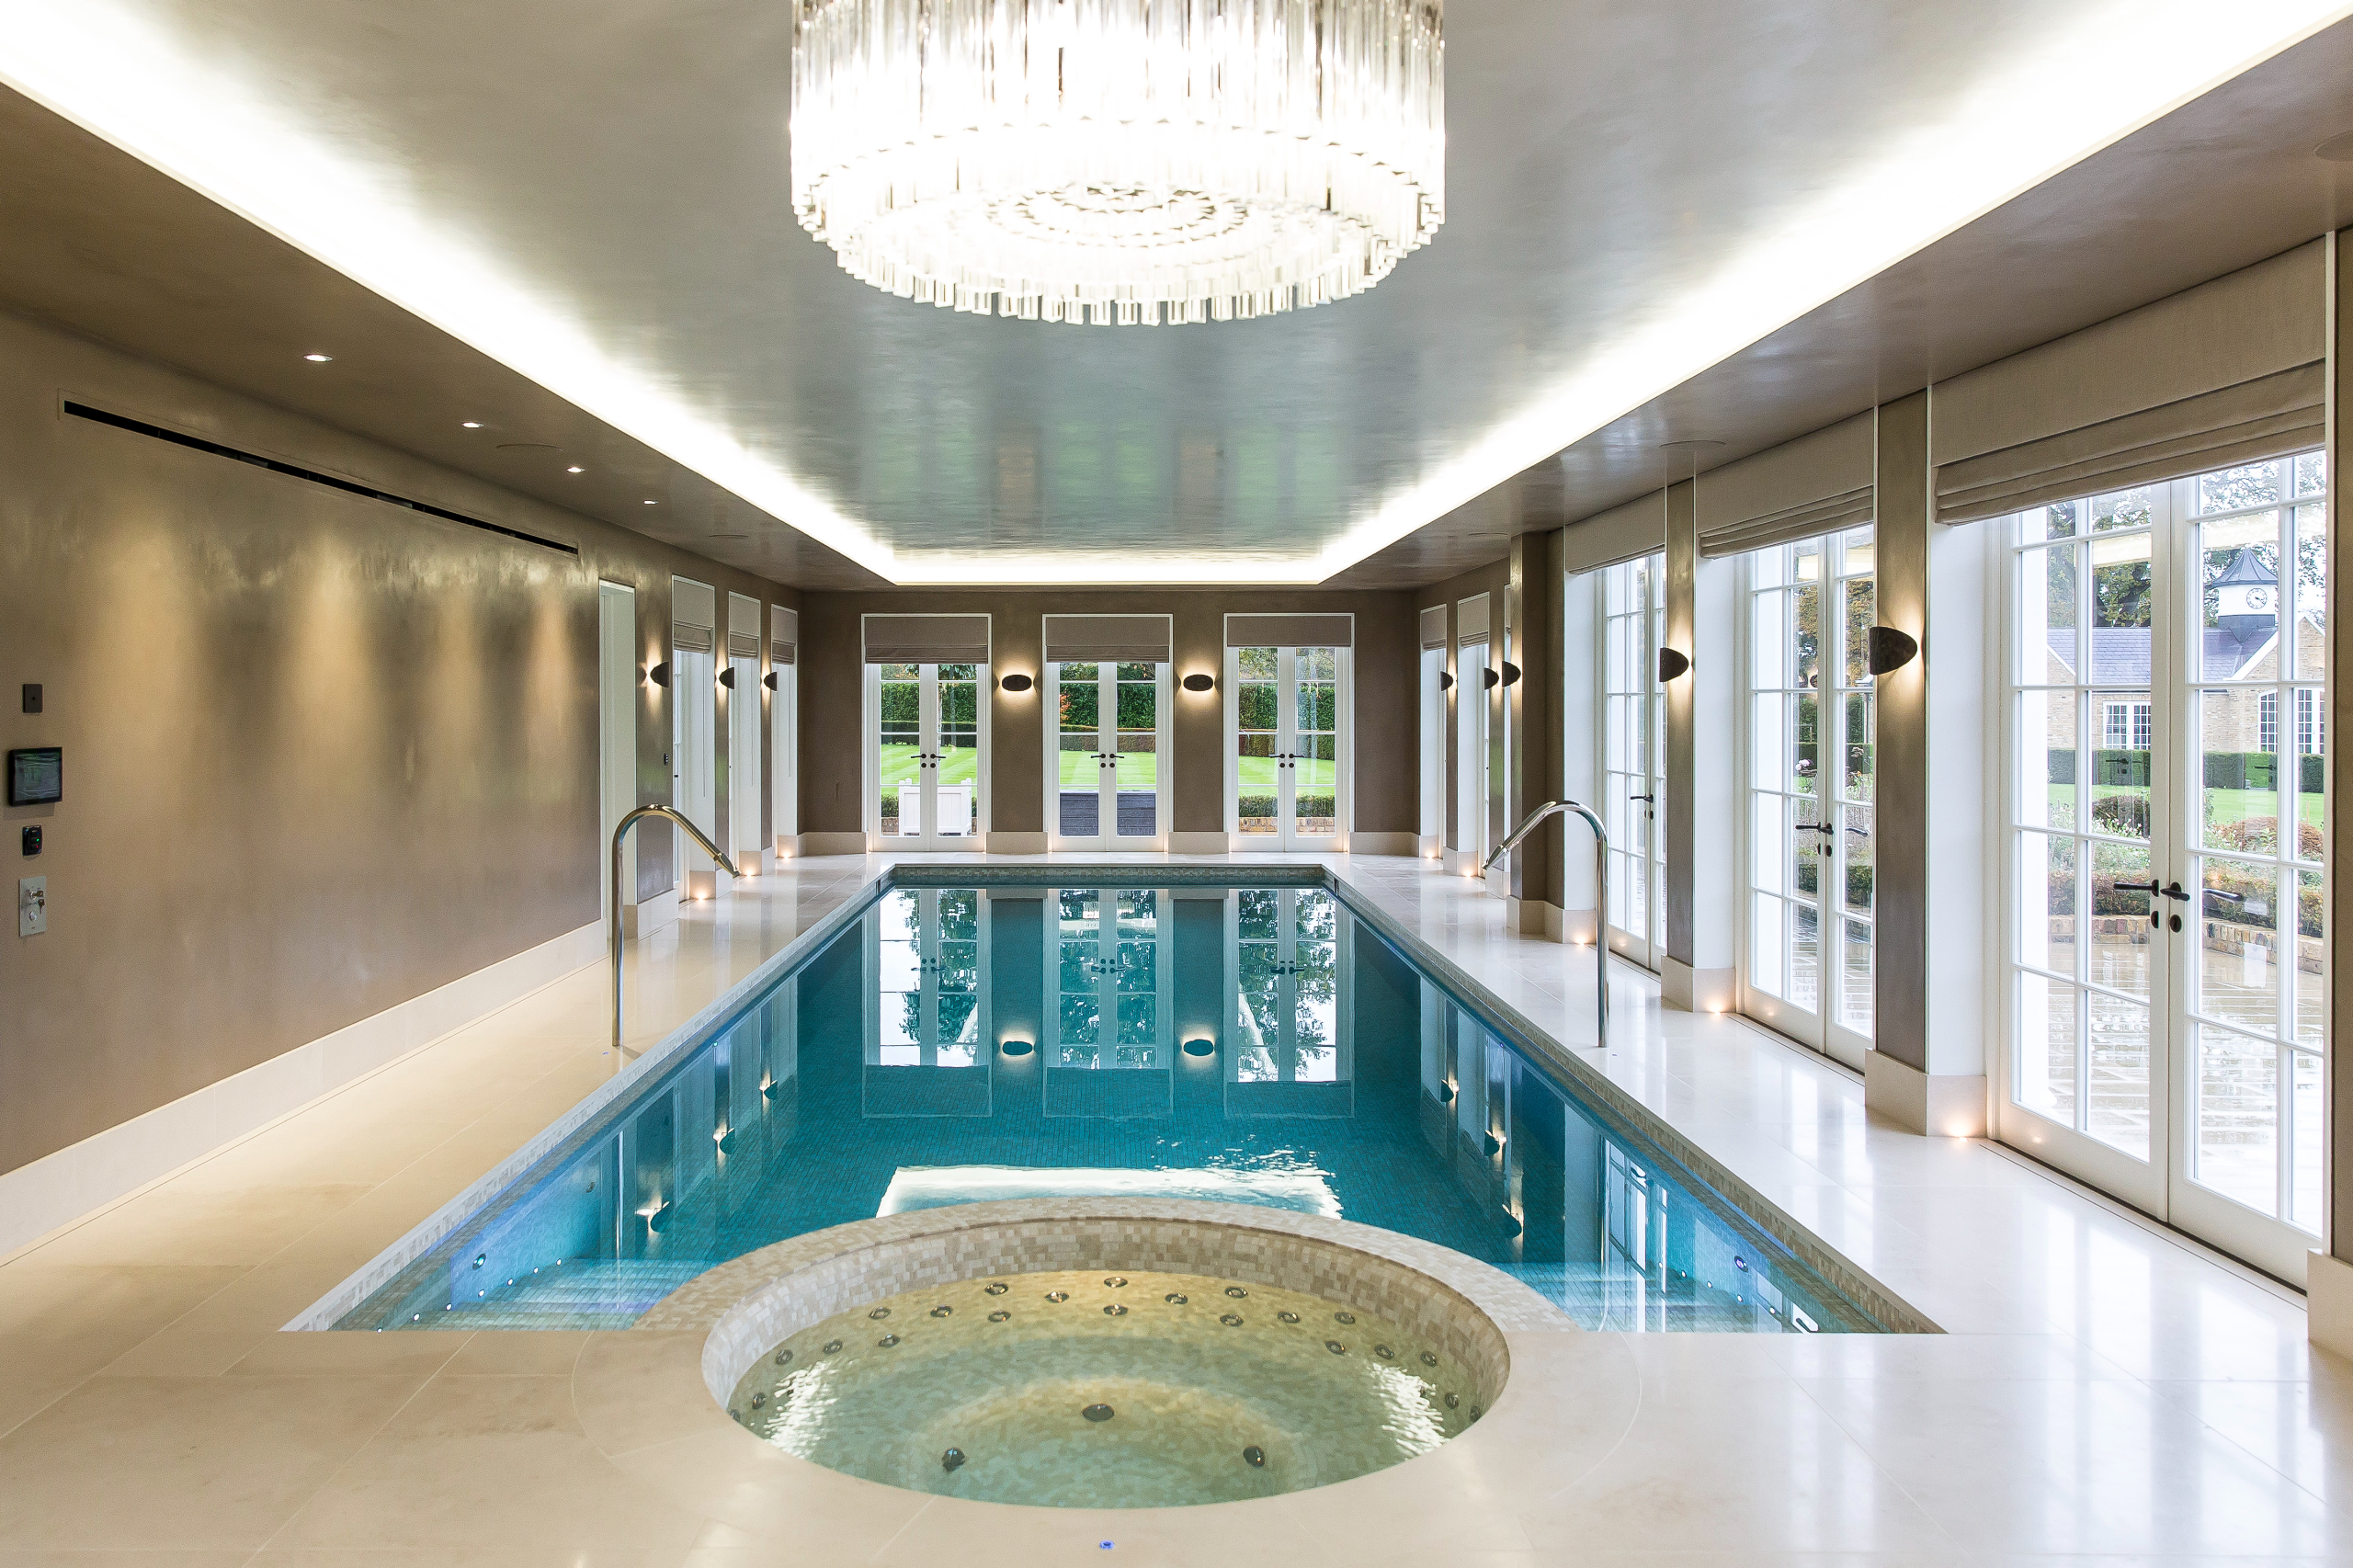 Swimming pool finishes for every taste | London Swimming Pool Company